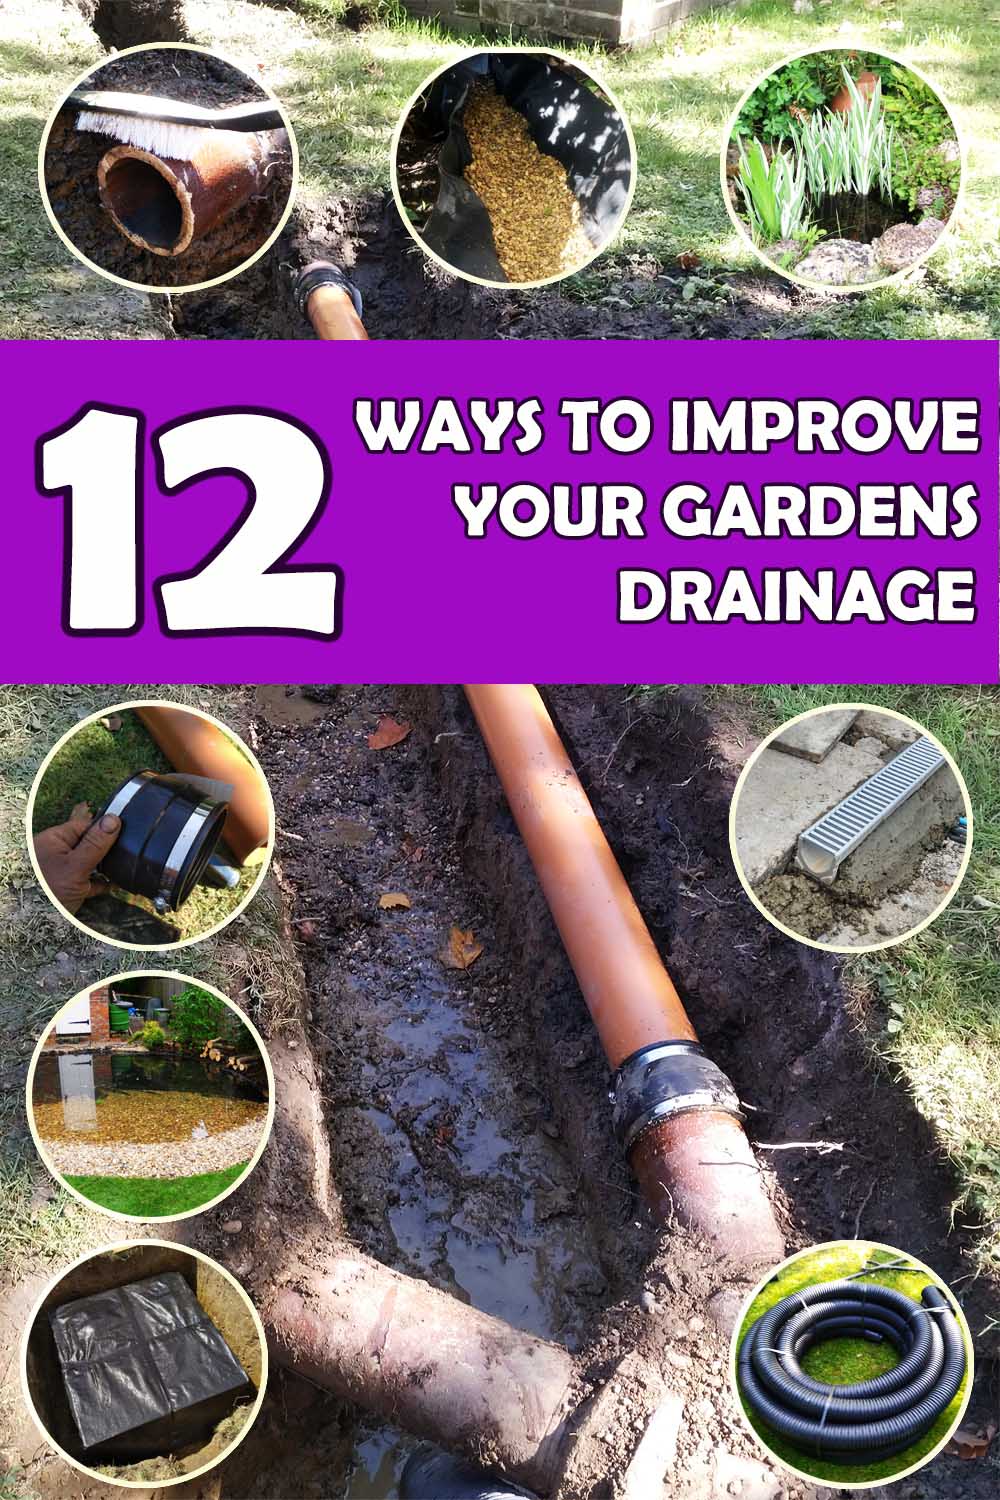 How to improve your gardens drainage